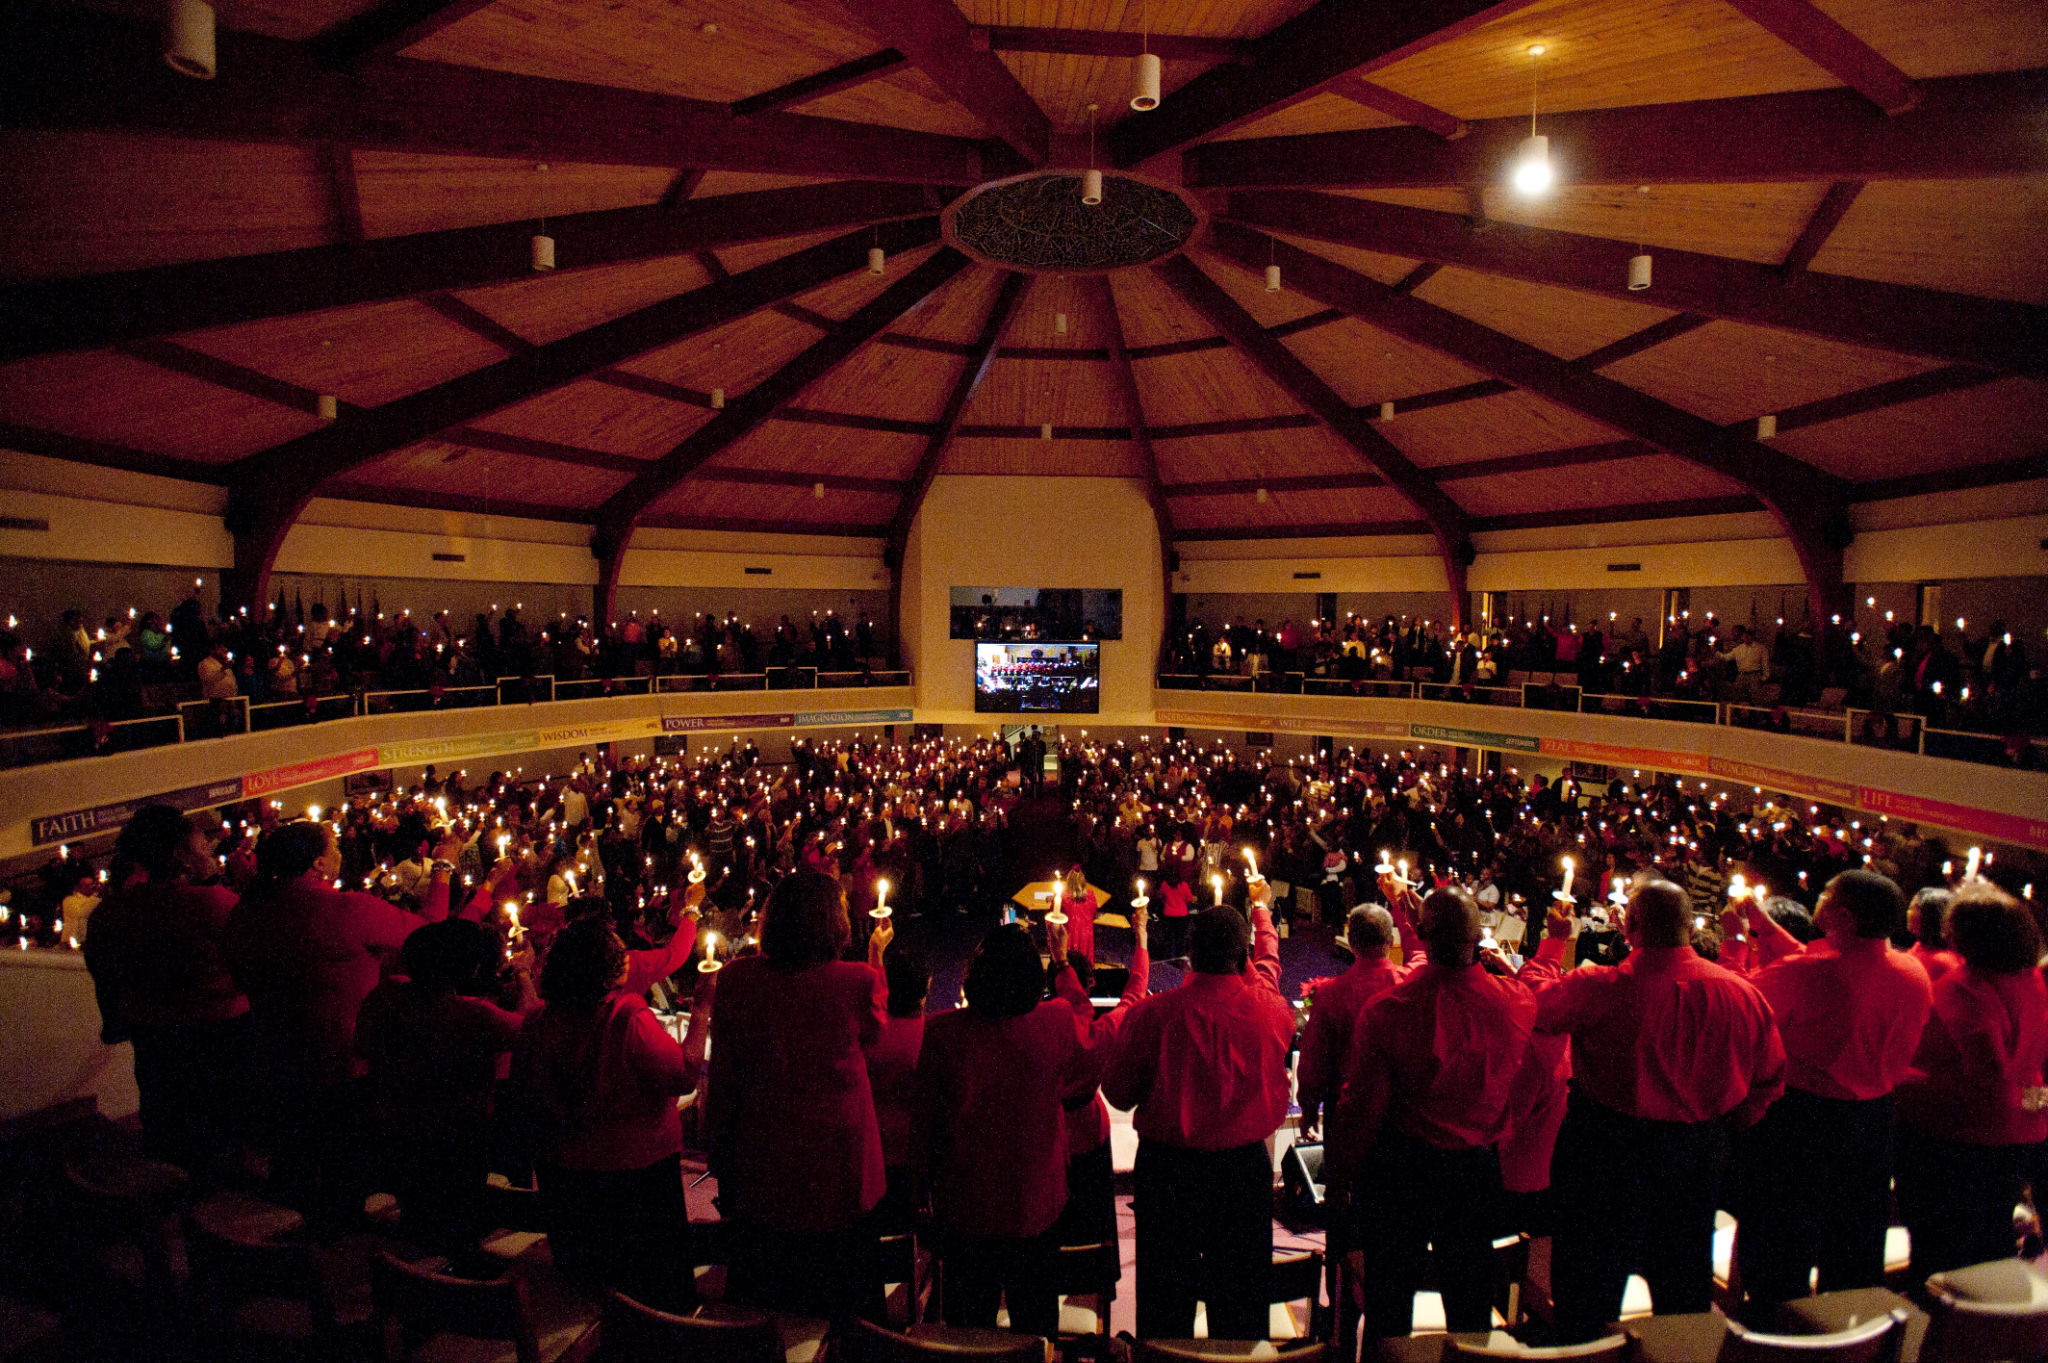 Hillside's New Year's Eve service typically is attended by a thousand or more.